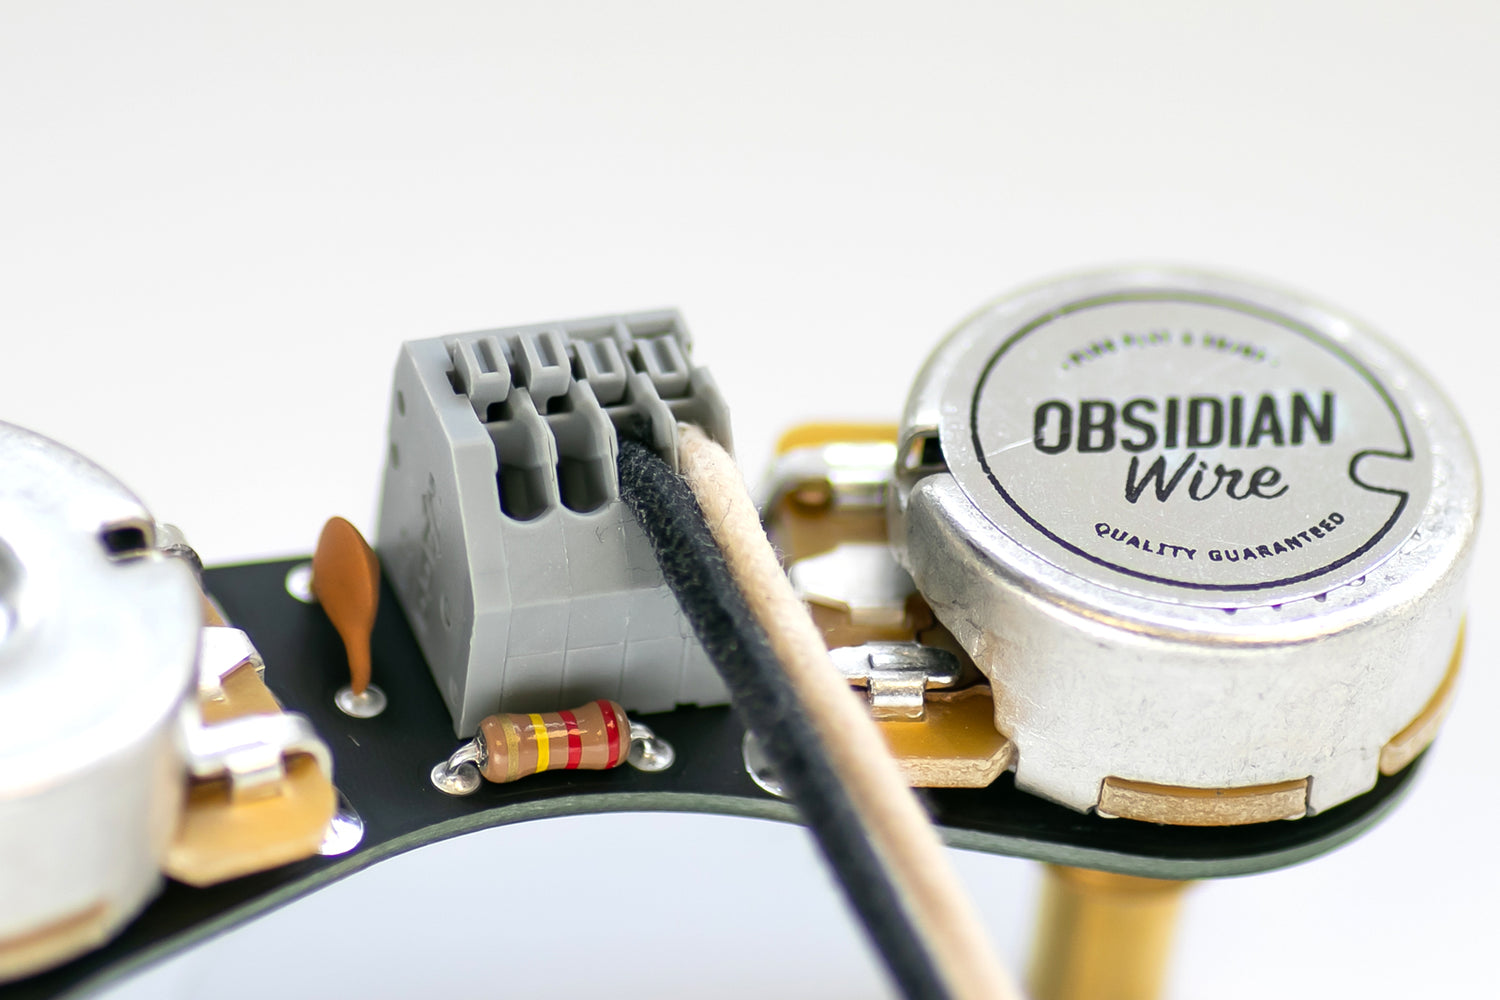 ObsidianWire for Precision Bass®